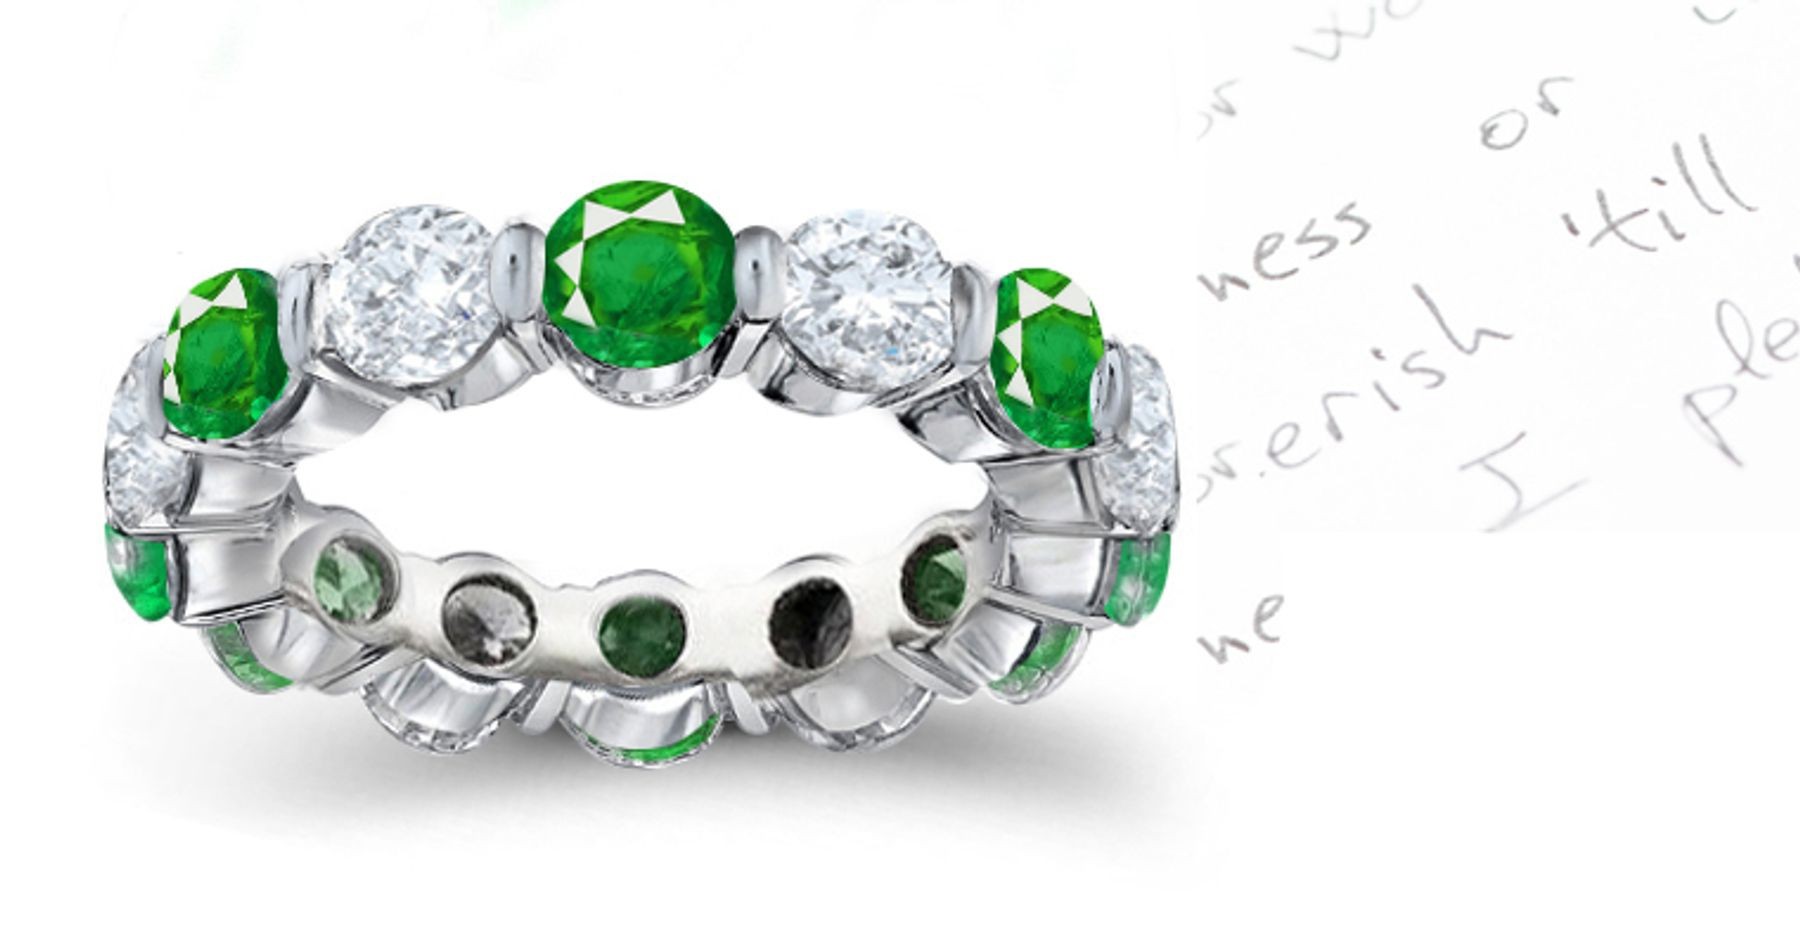 The finest of All: Well-Cut Round Diamond & Emerald Eternity Wedding Ring